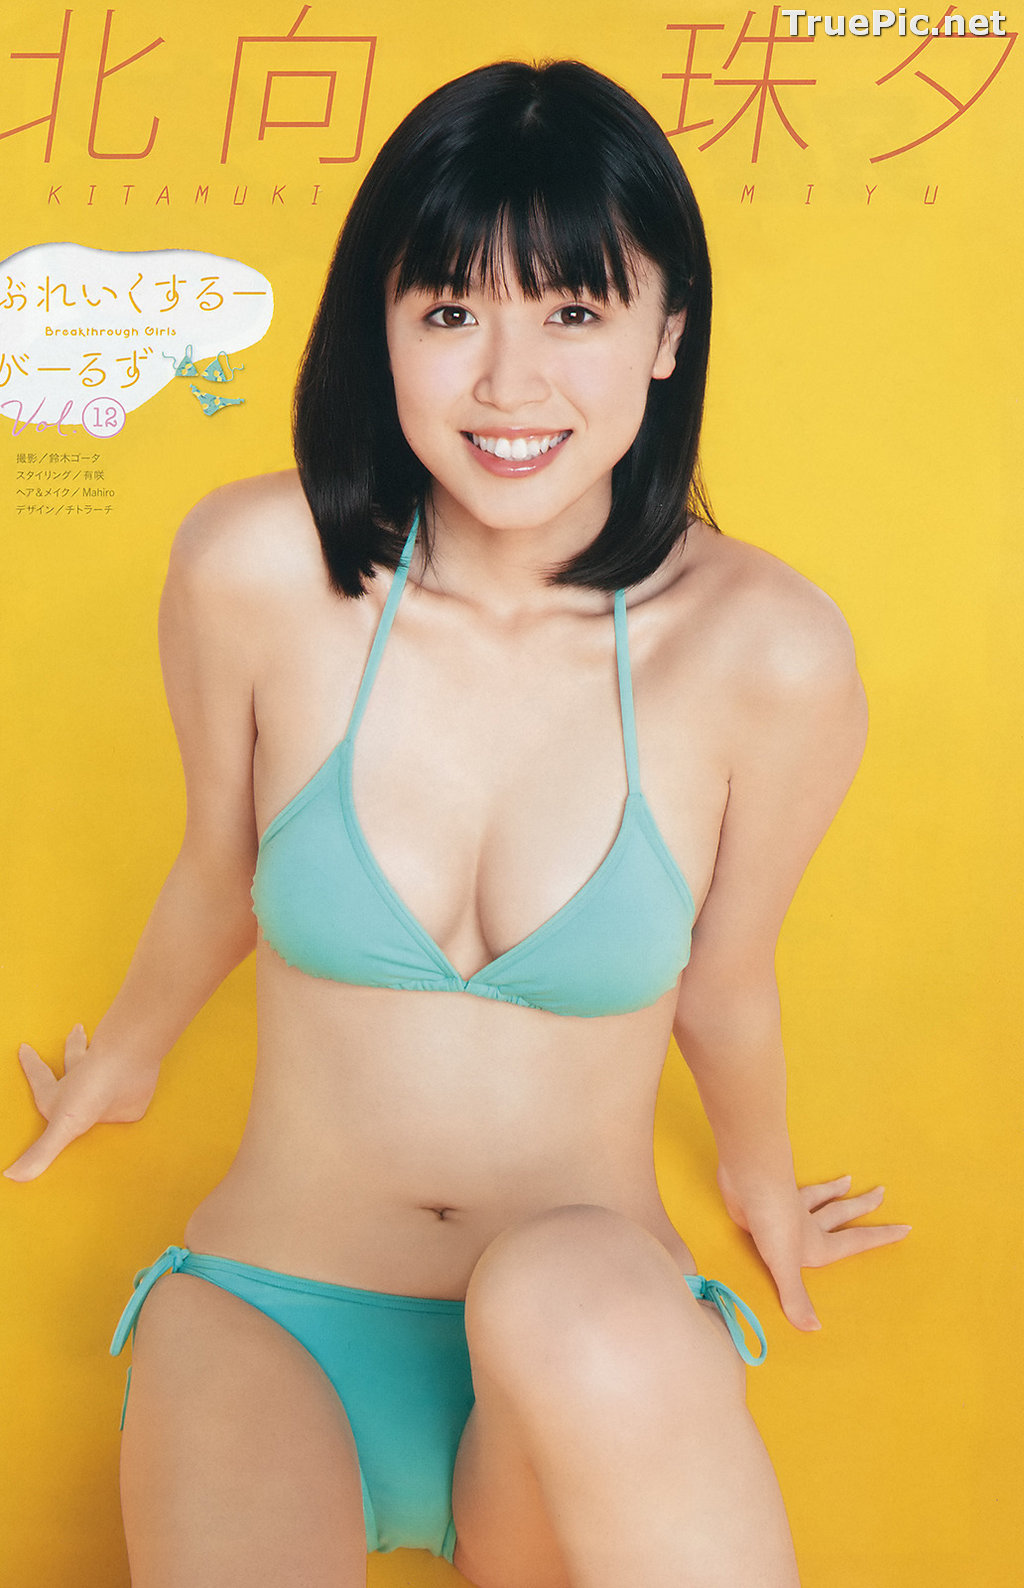 ImageJapanese Gravure Idol and Actress - Kitamuki Miyu (北向珠夕) - Sexy Picture Collection 2020 - TruePic.net - Picture-153